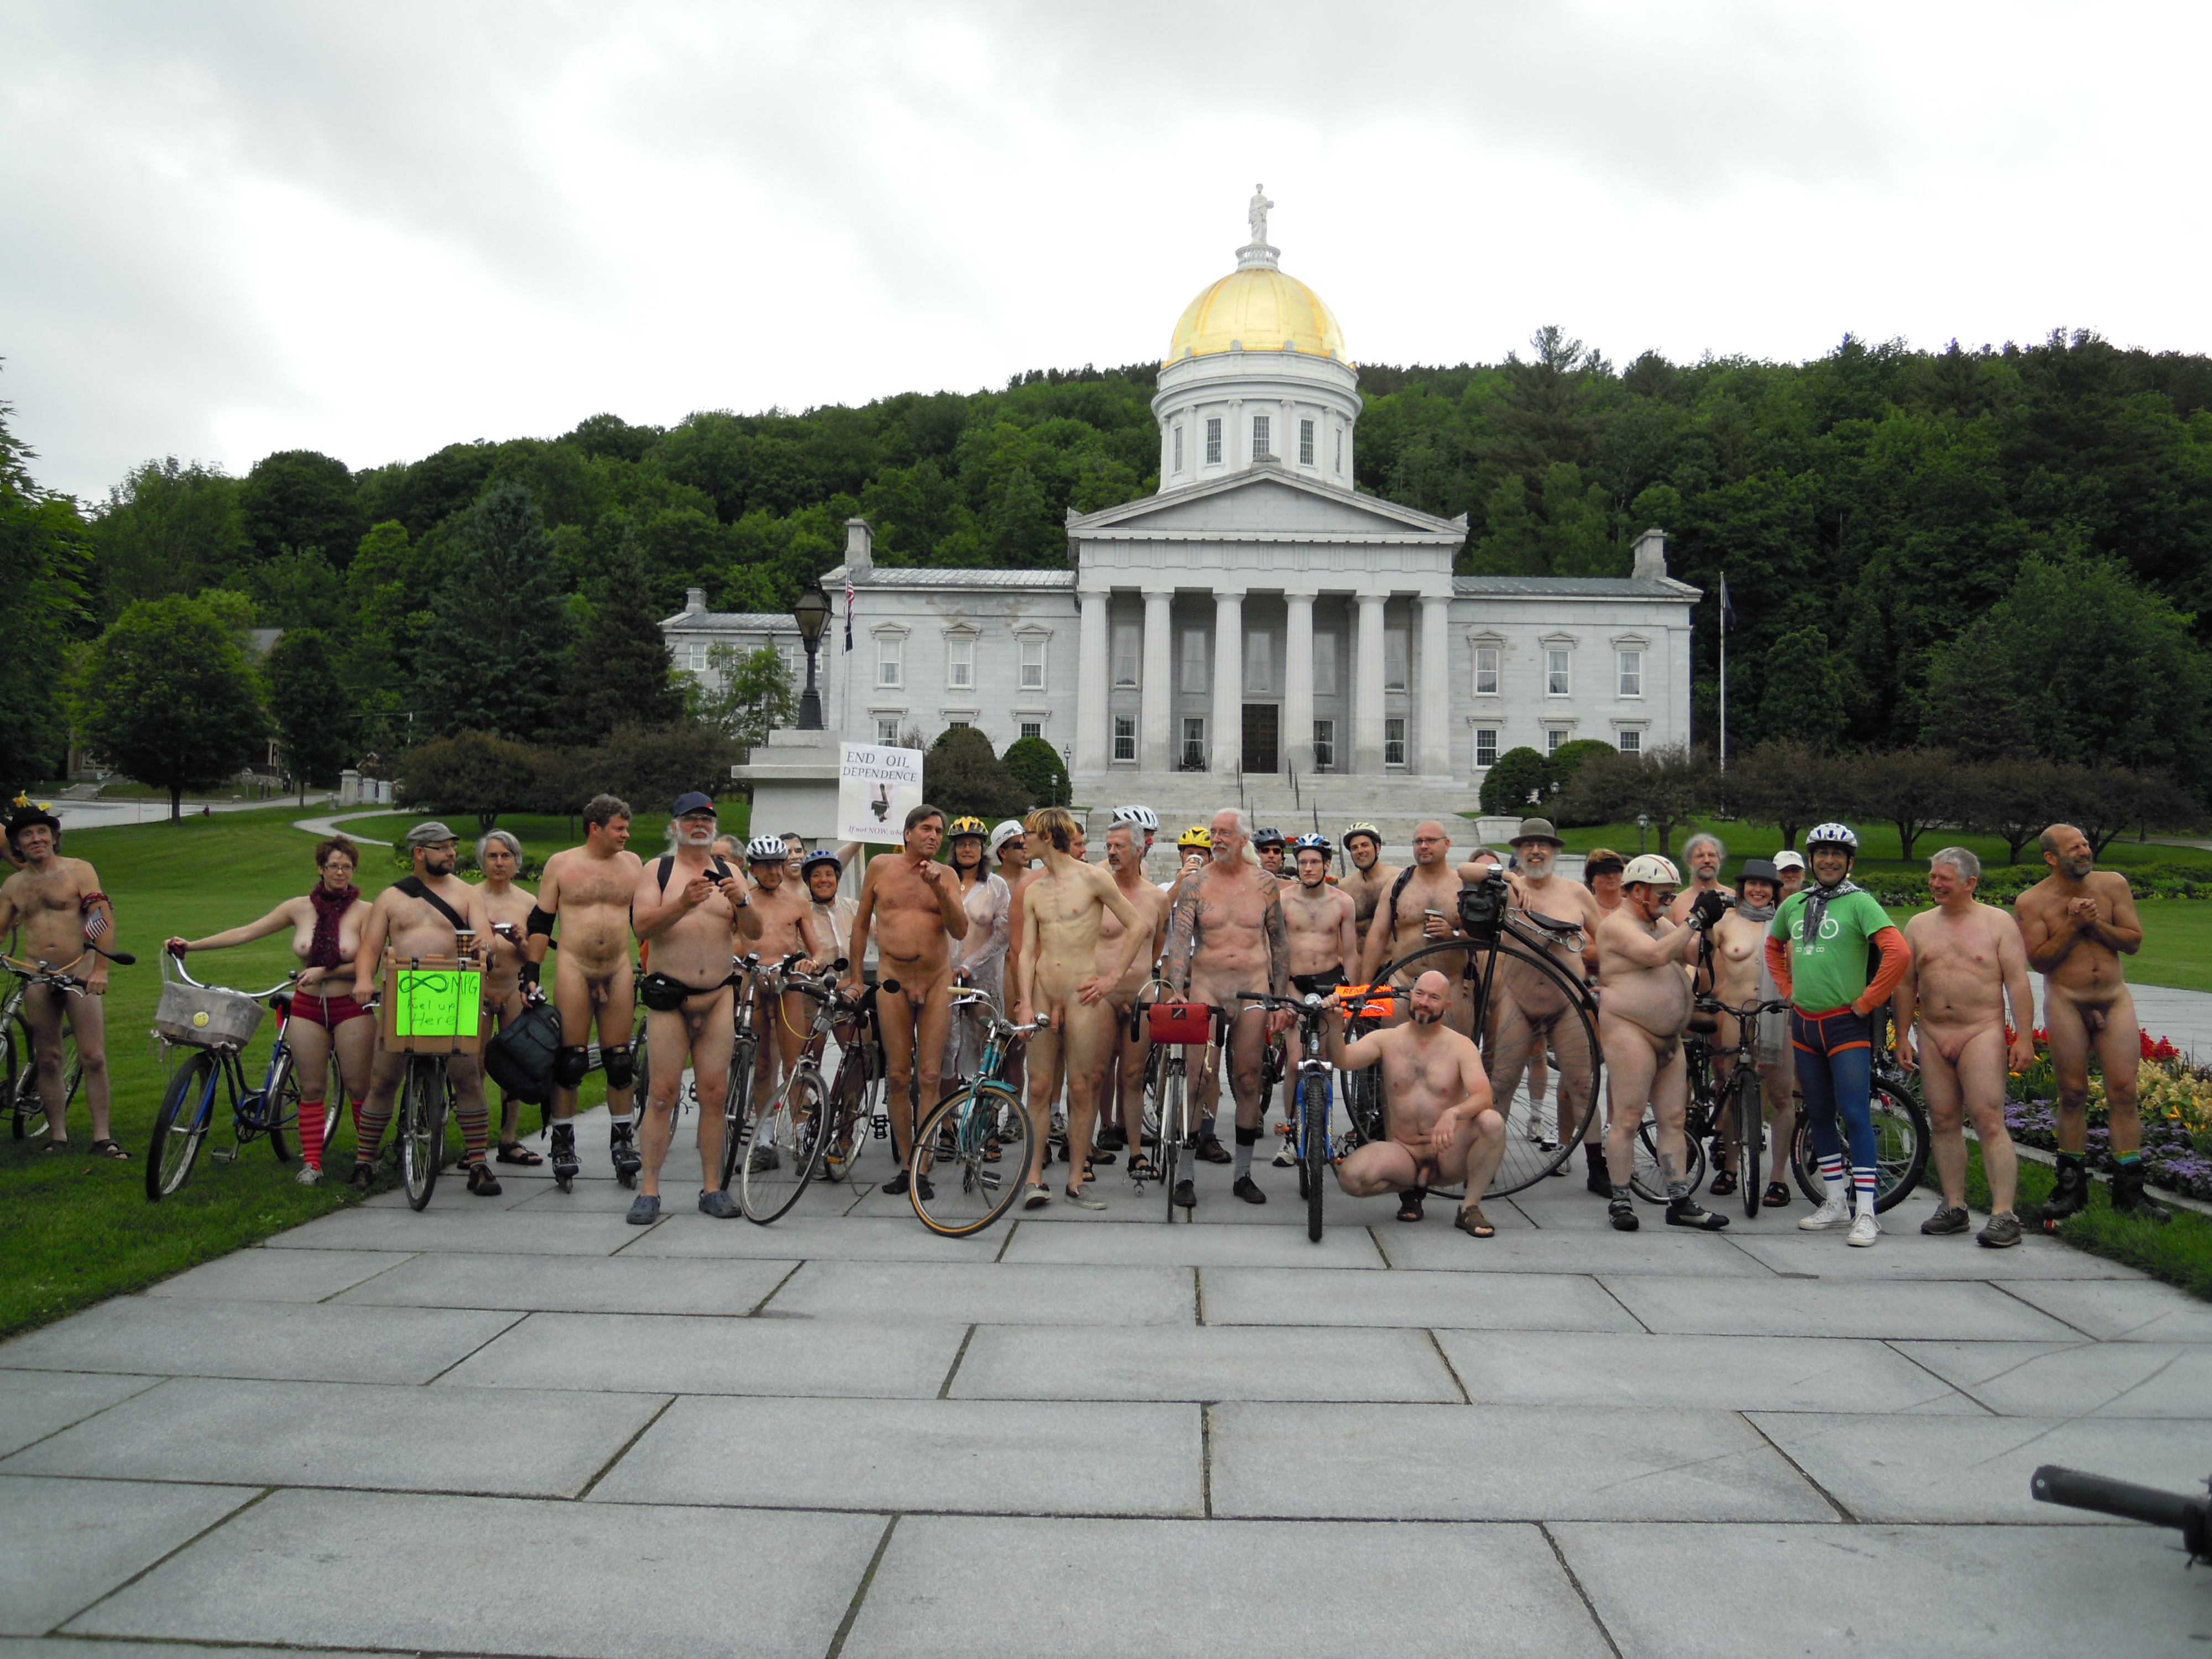 Naked riders @ the Statehouse, 2010